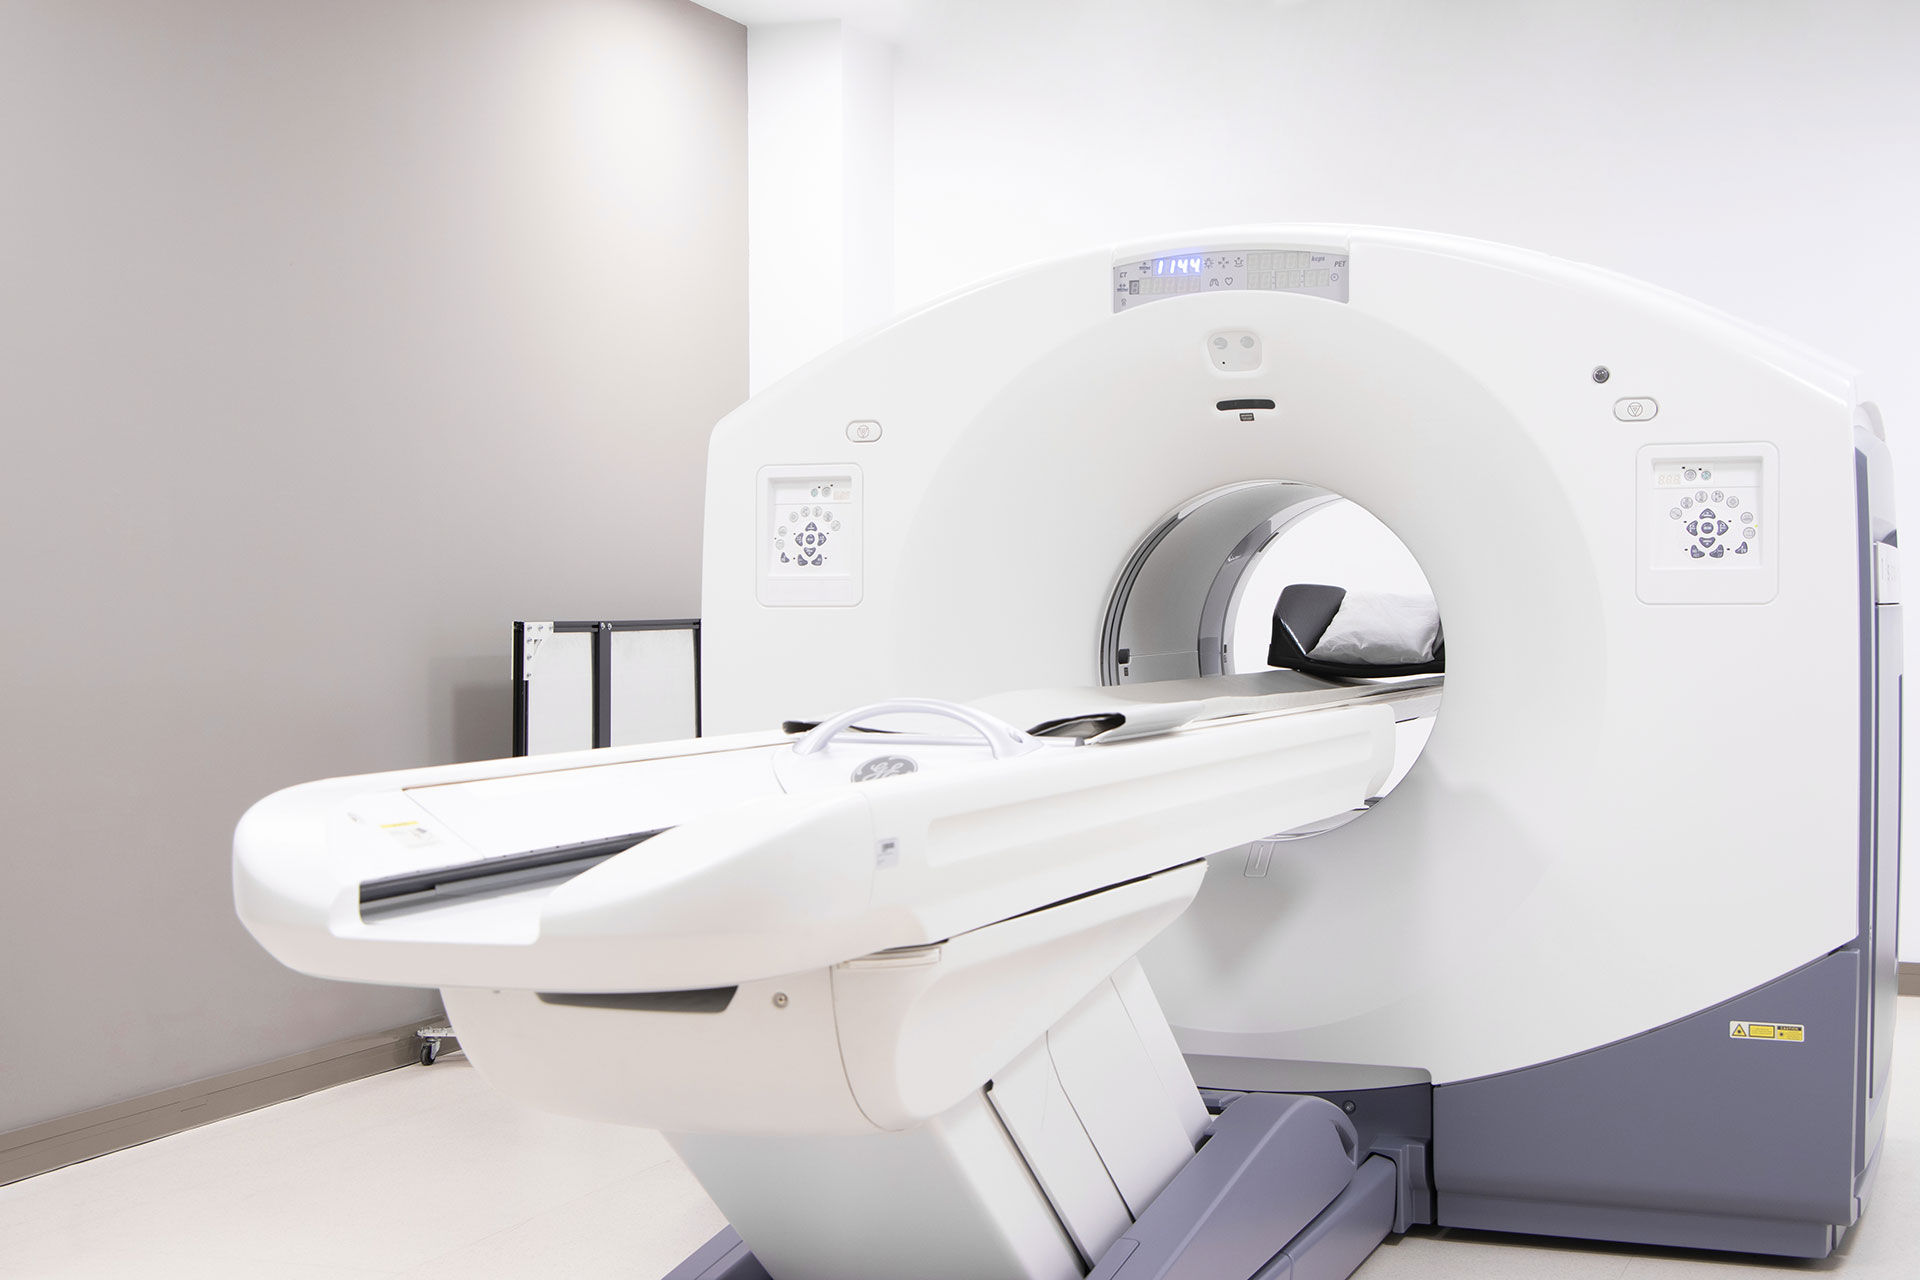 Integra Medical Imaging | MRI Services, On-Site Mobile MRI Services and MRI Leasing/Rental